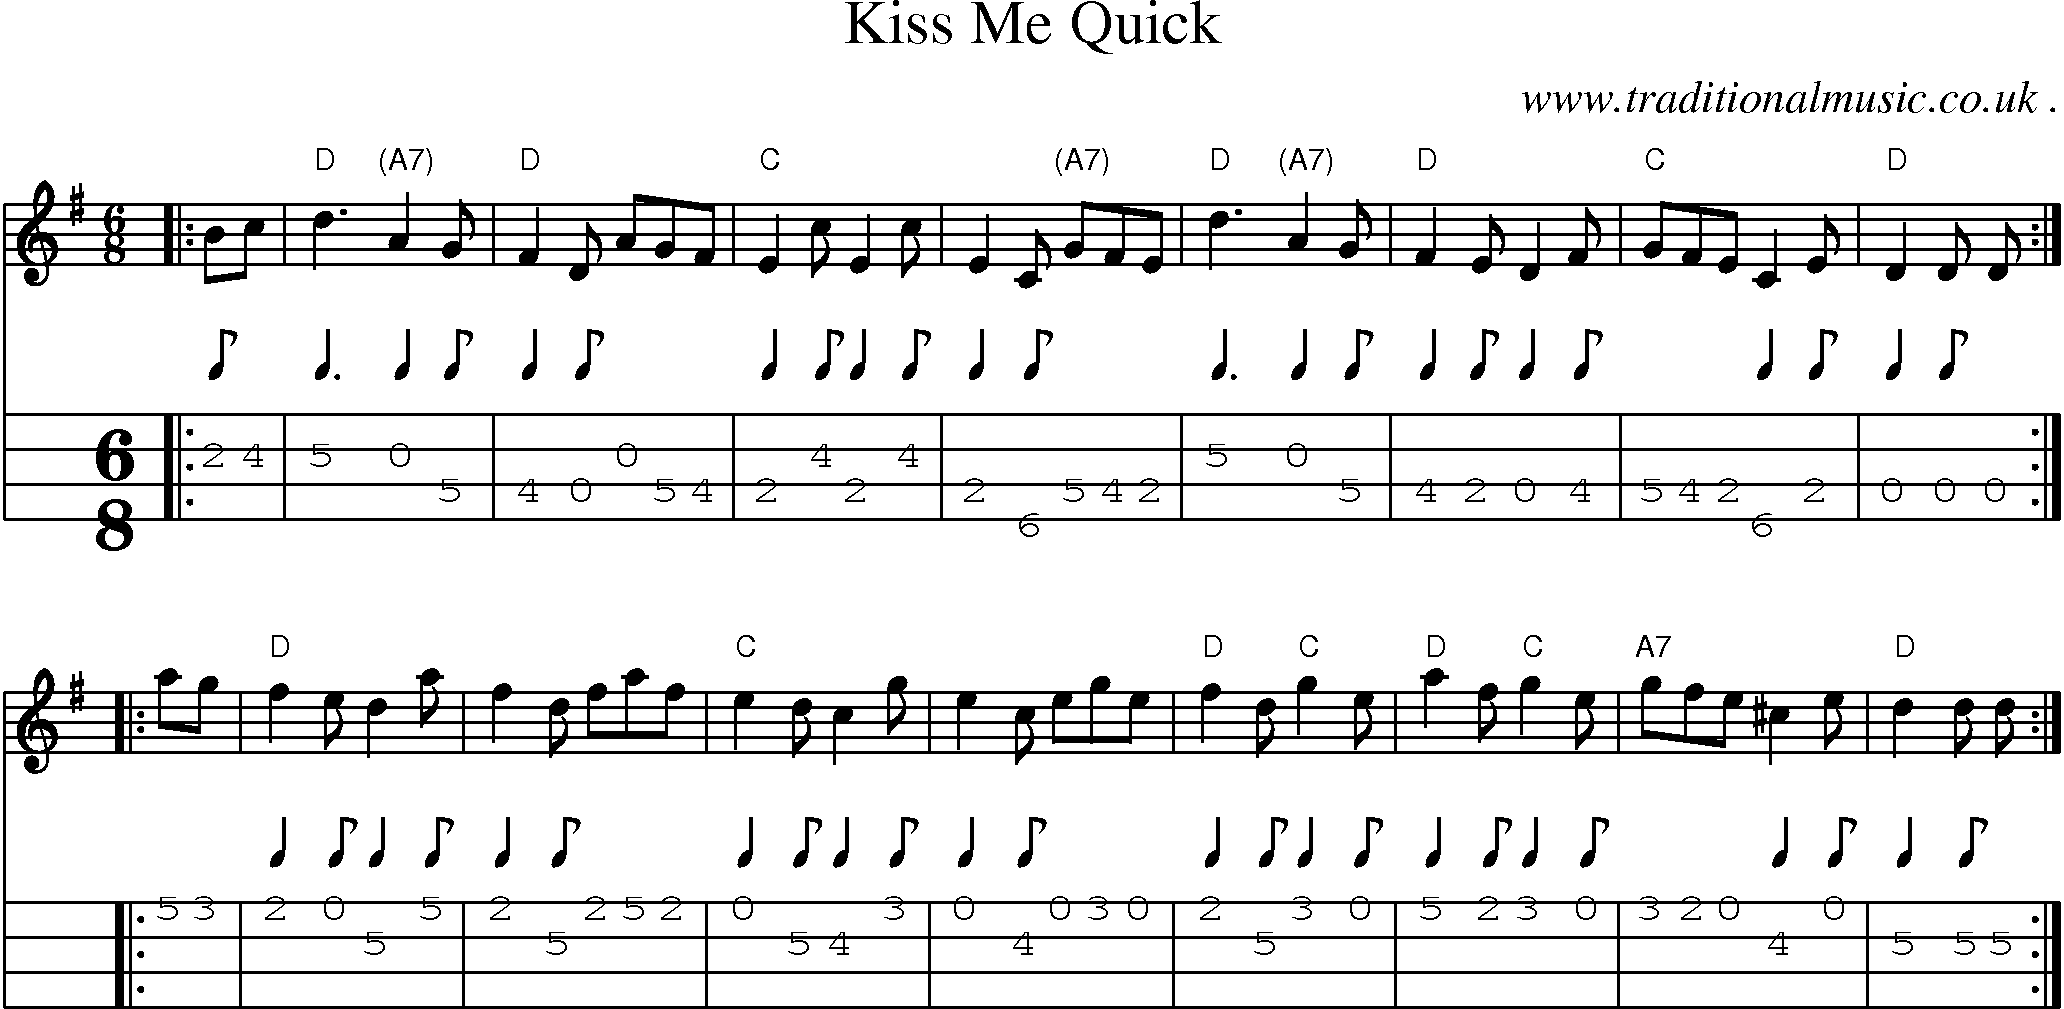 Sheet-music  score, Chords and Mandolin Tabs for Kiss Me Quick